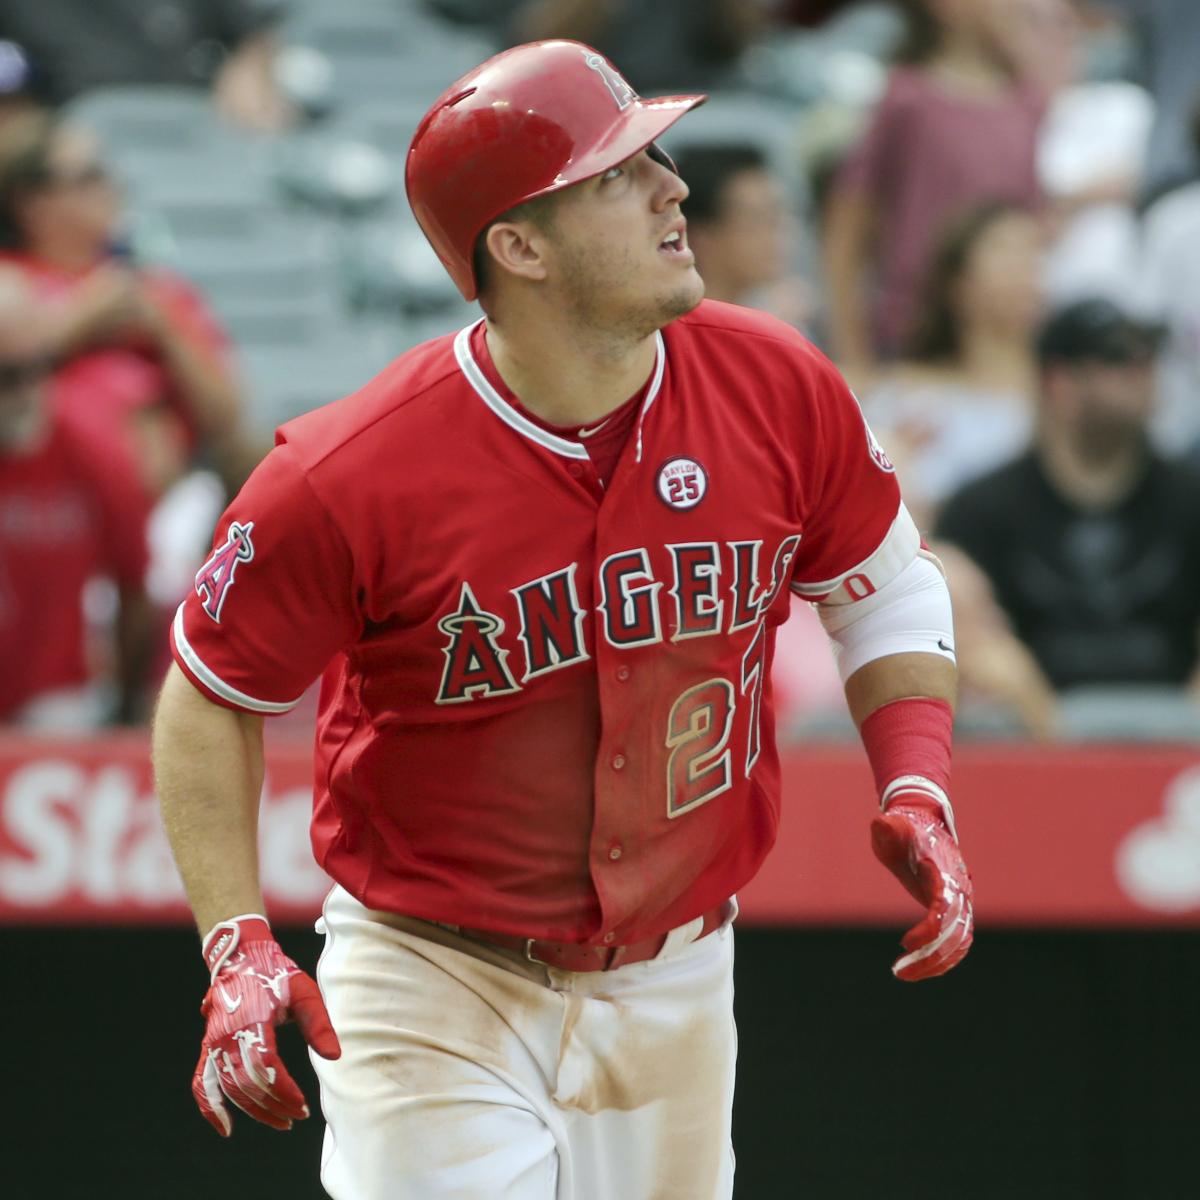 Mike Trout on The Sports Bash: “Weight Not an Issue”